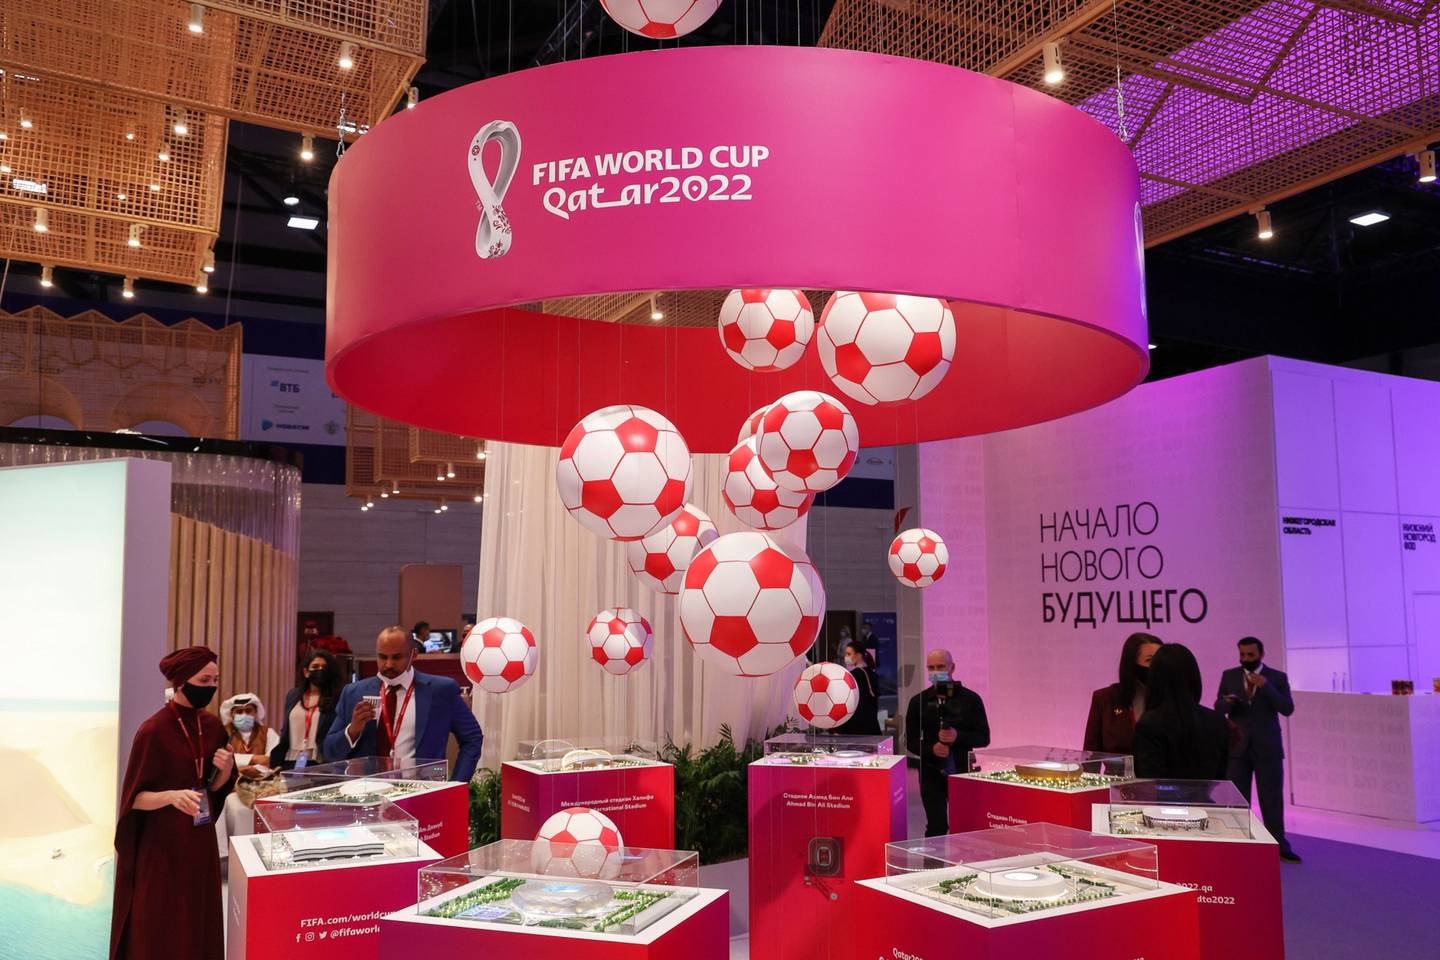 Argentina, Mexico, Brazil and the U.S. are among the countries from which most tickets have been bought for the Qatar 2022 FIFA World Cup.